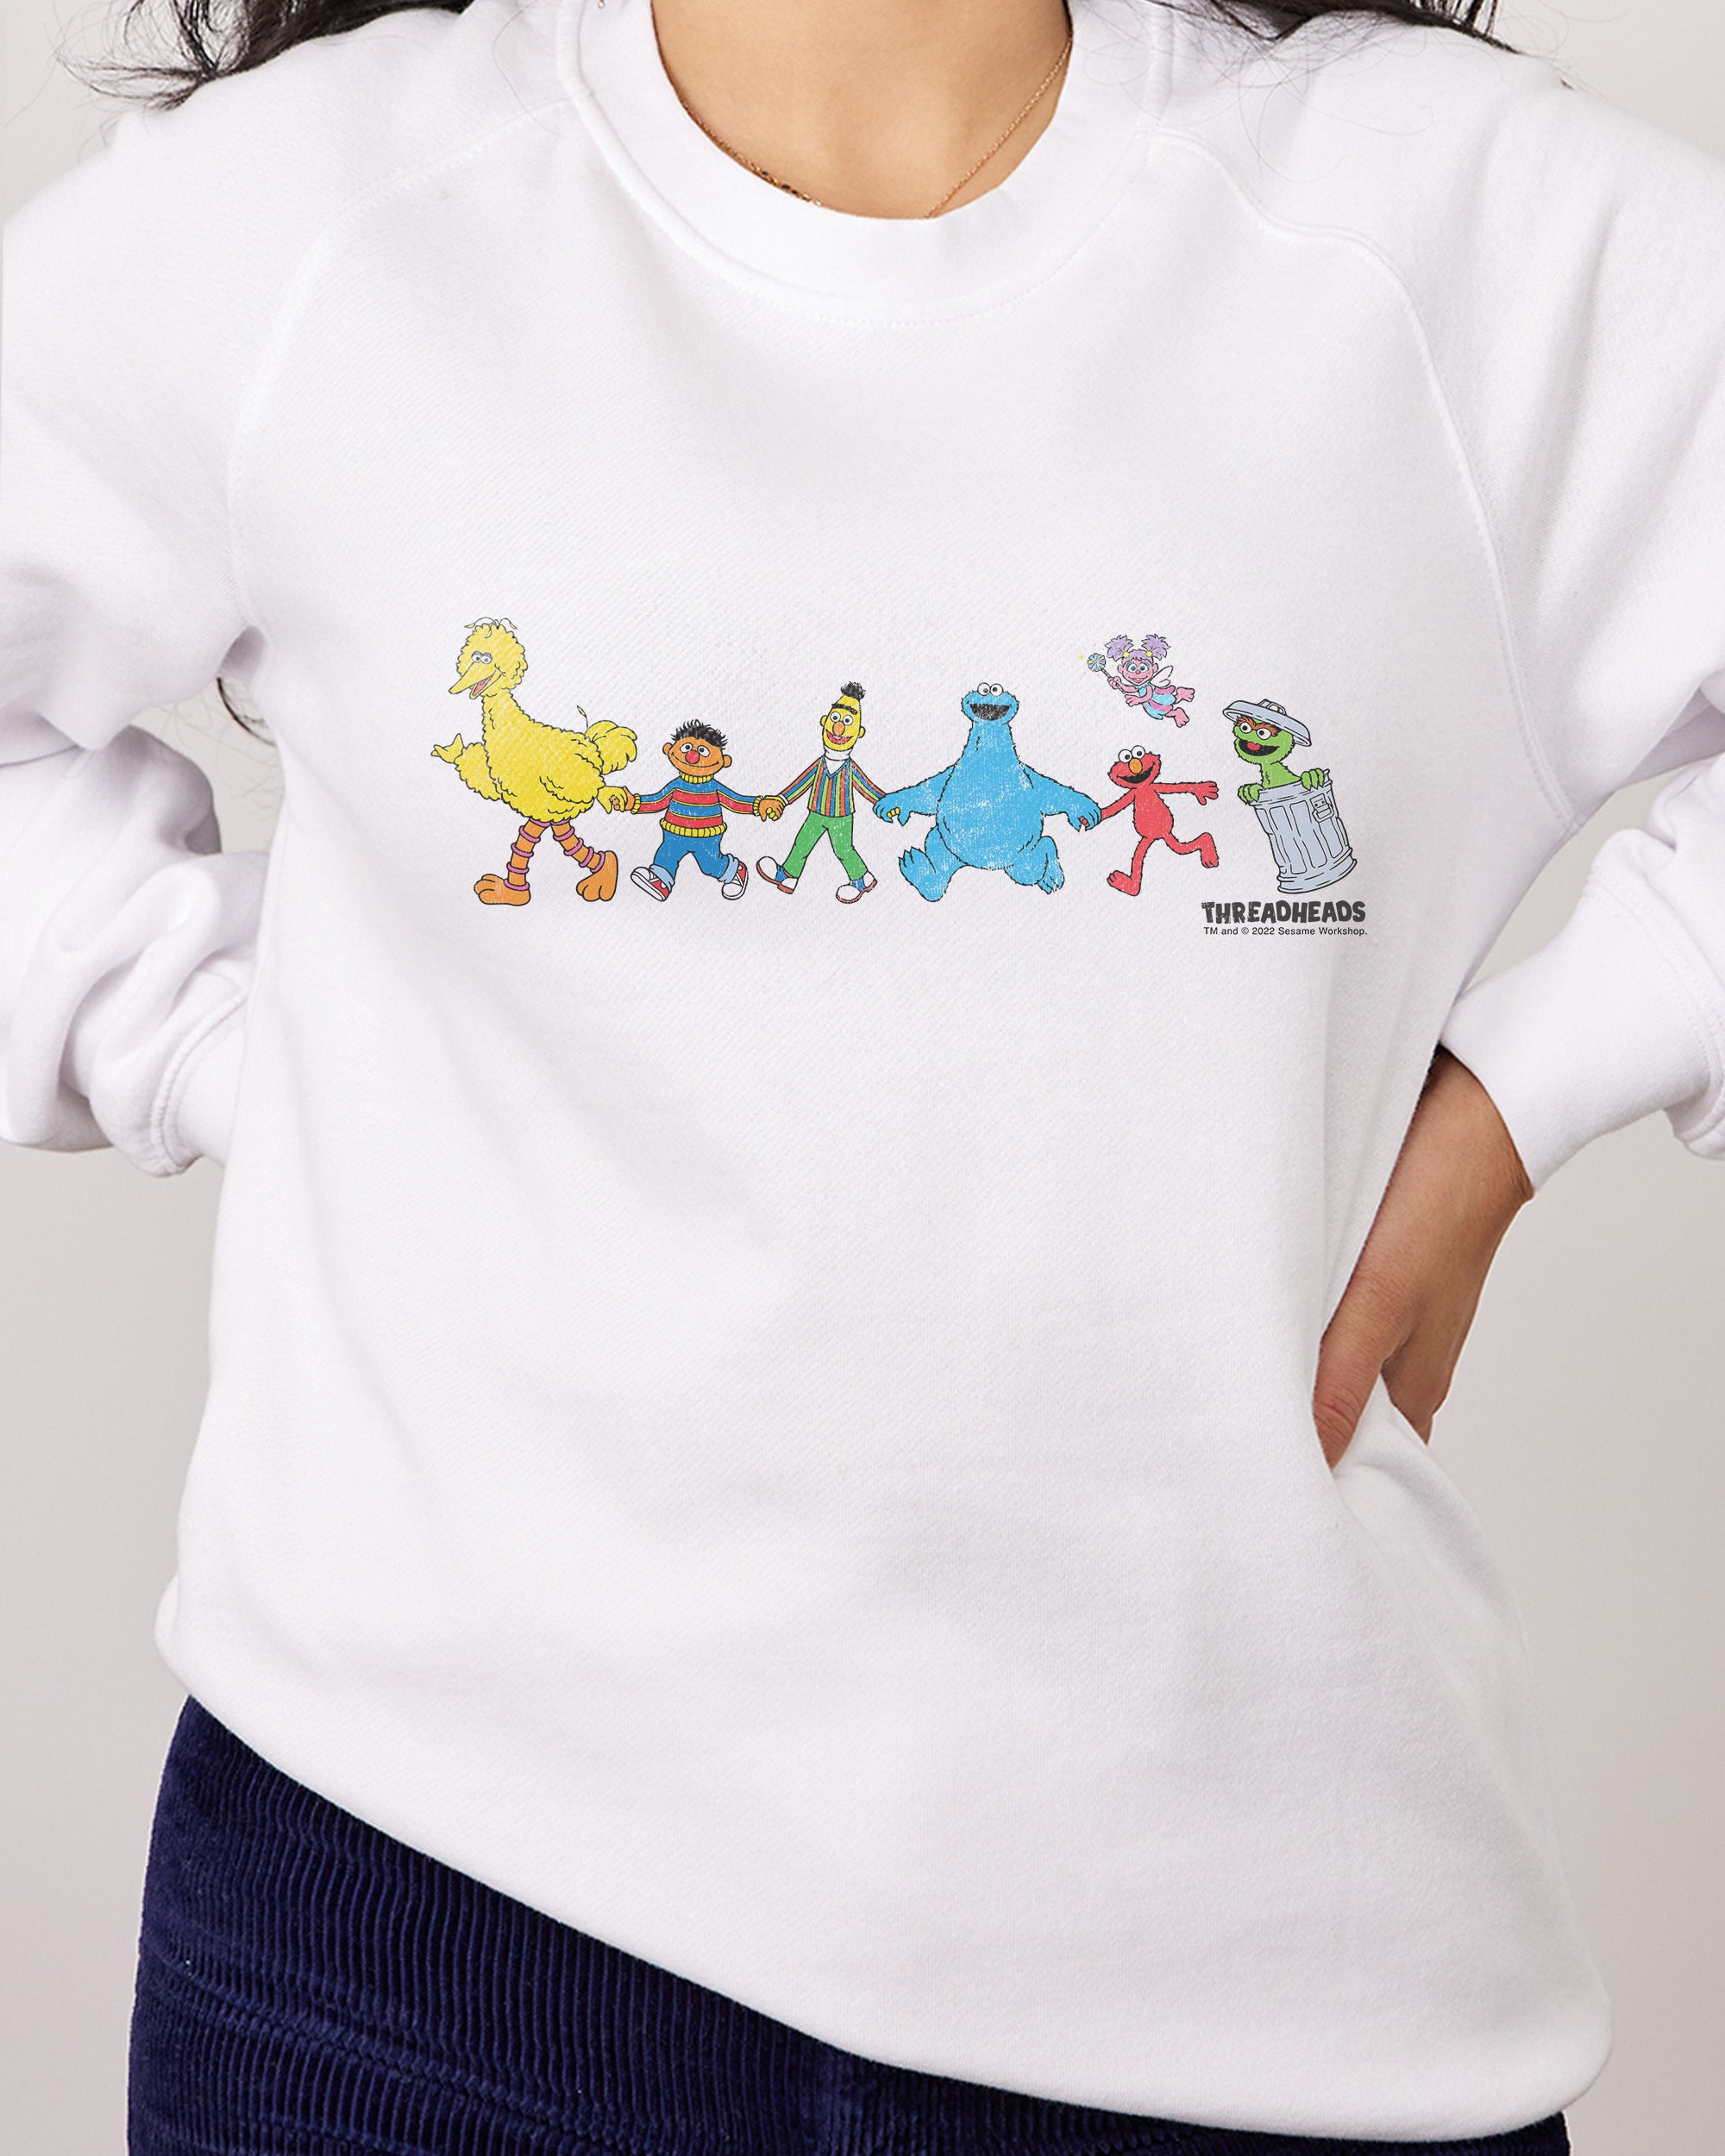 Walk With Me Jumper